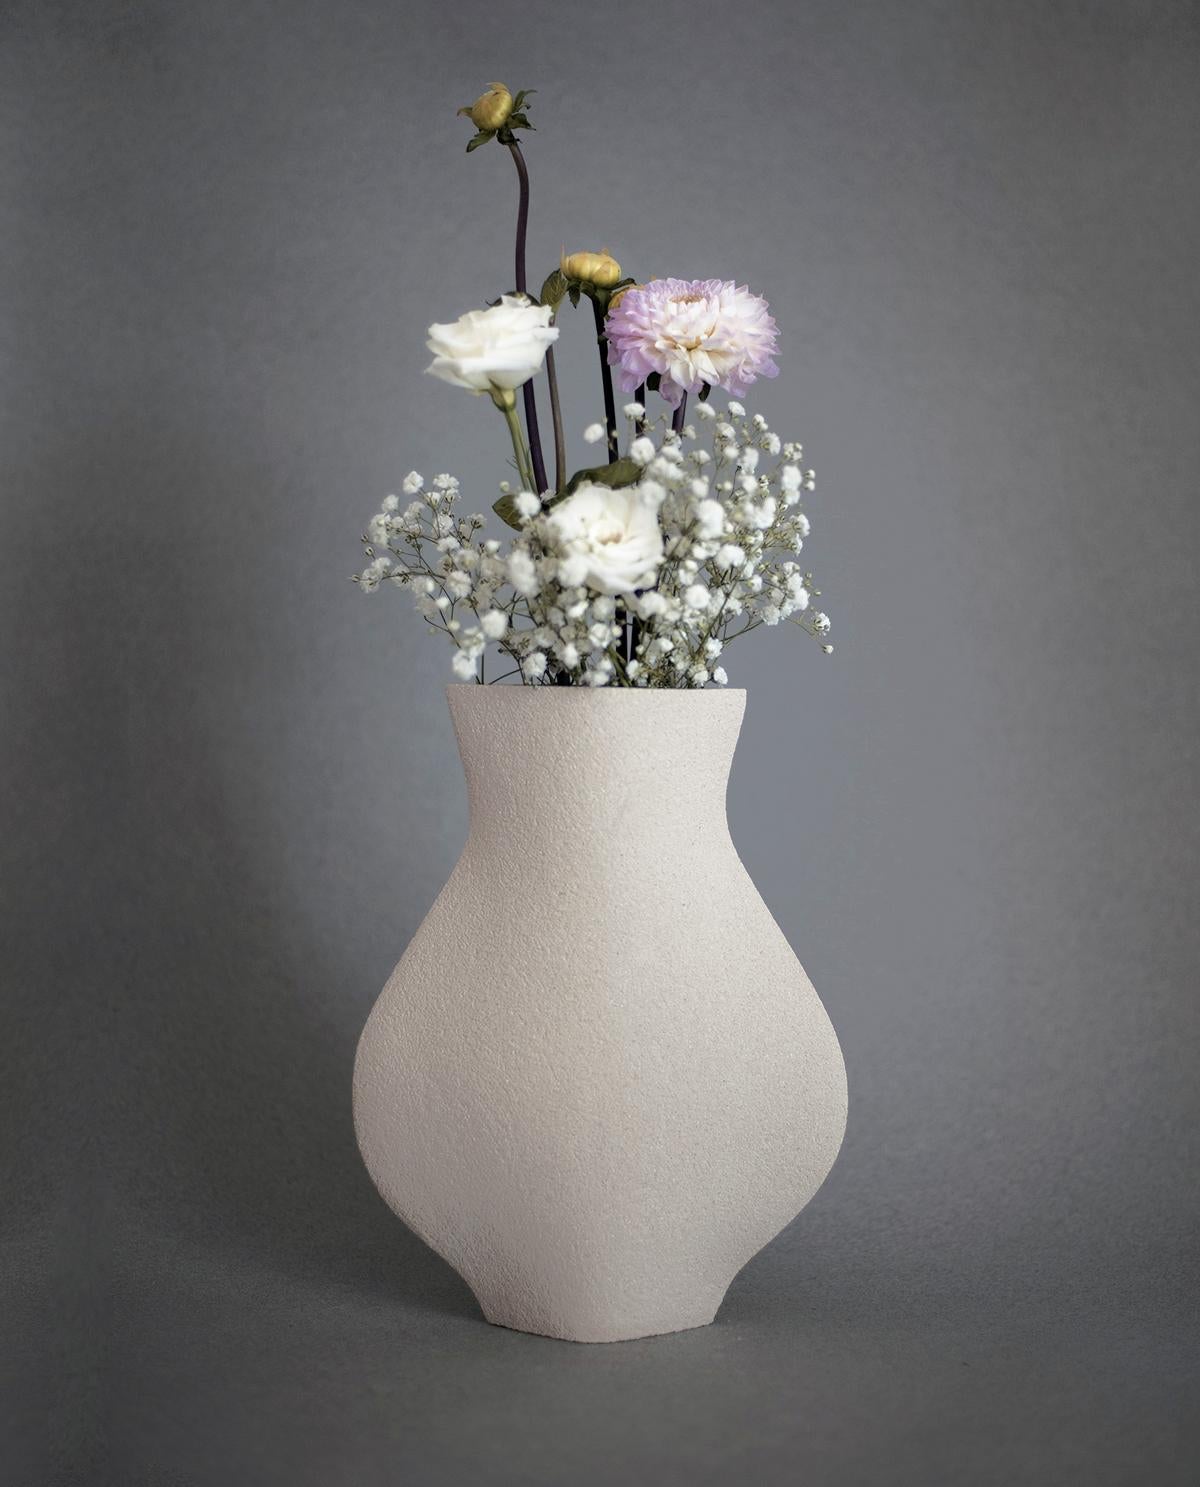 Minimalist 21st Century Jarre Vase in White Ceramic, Hand-Crafted in France For Sale